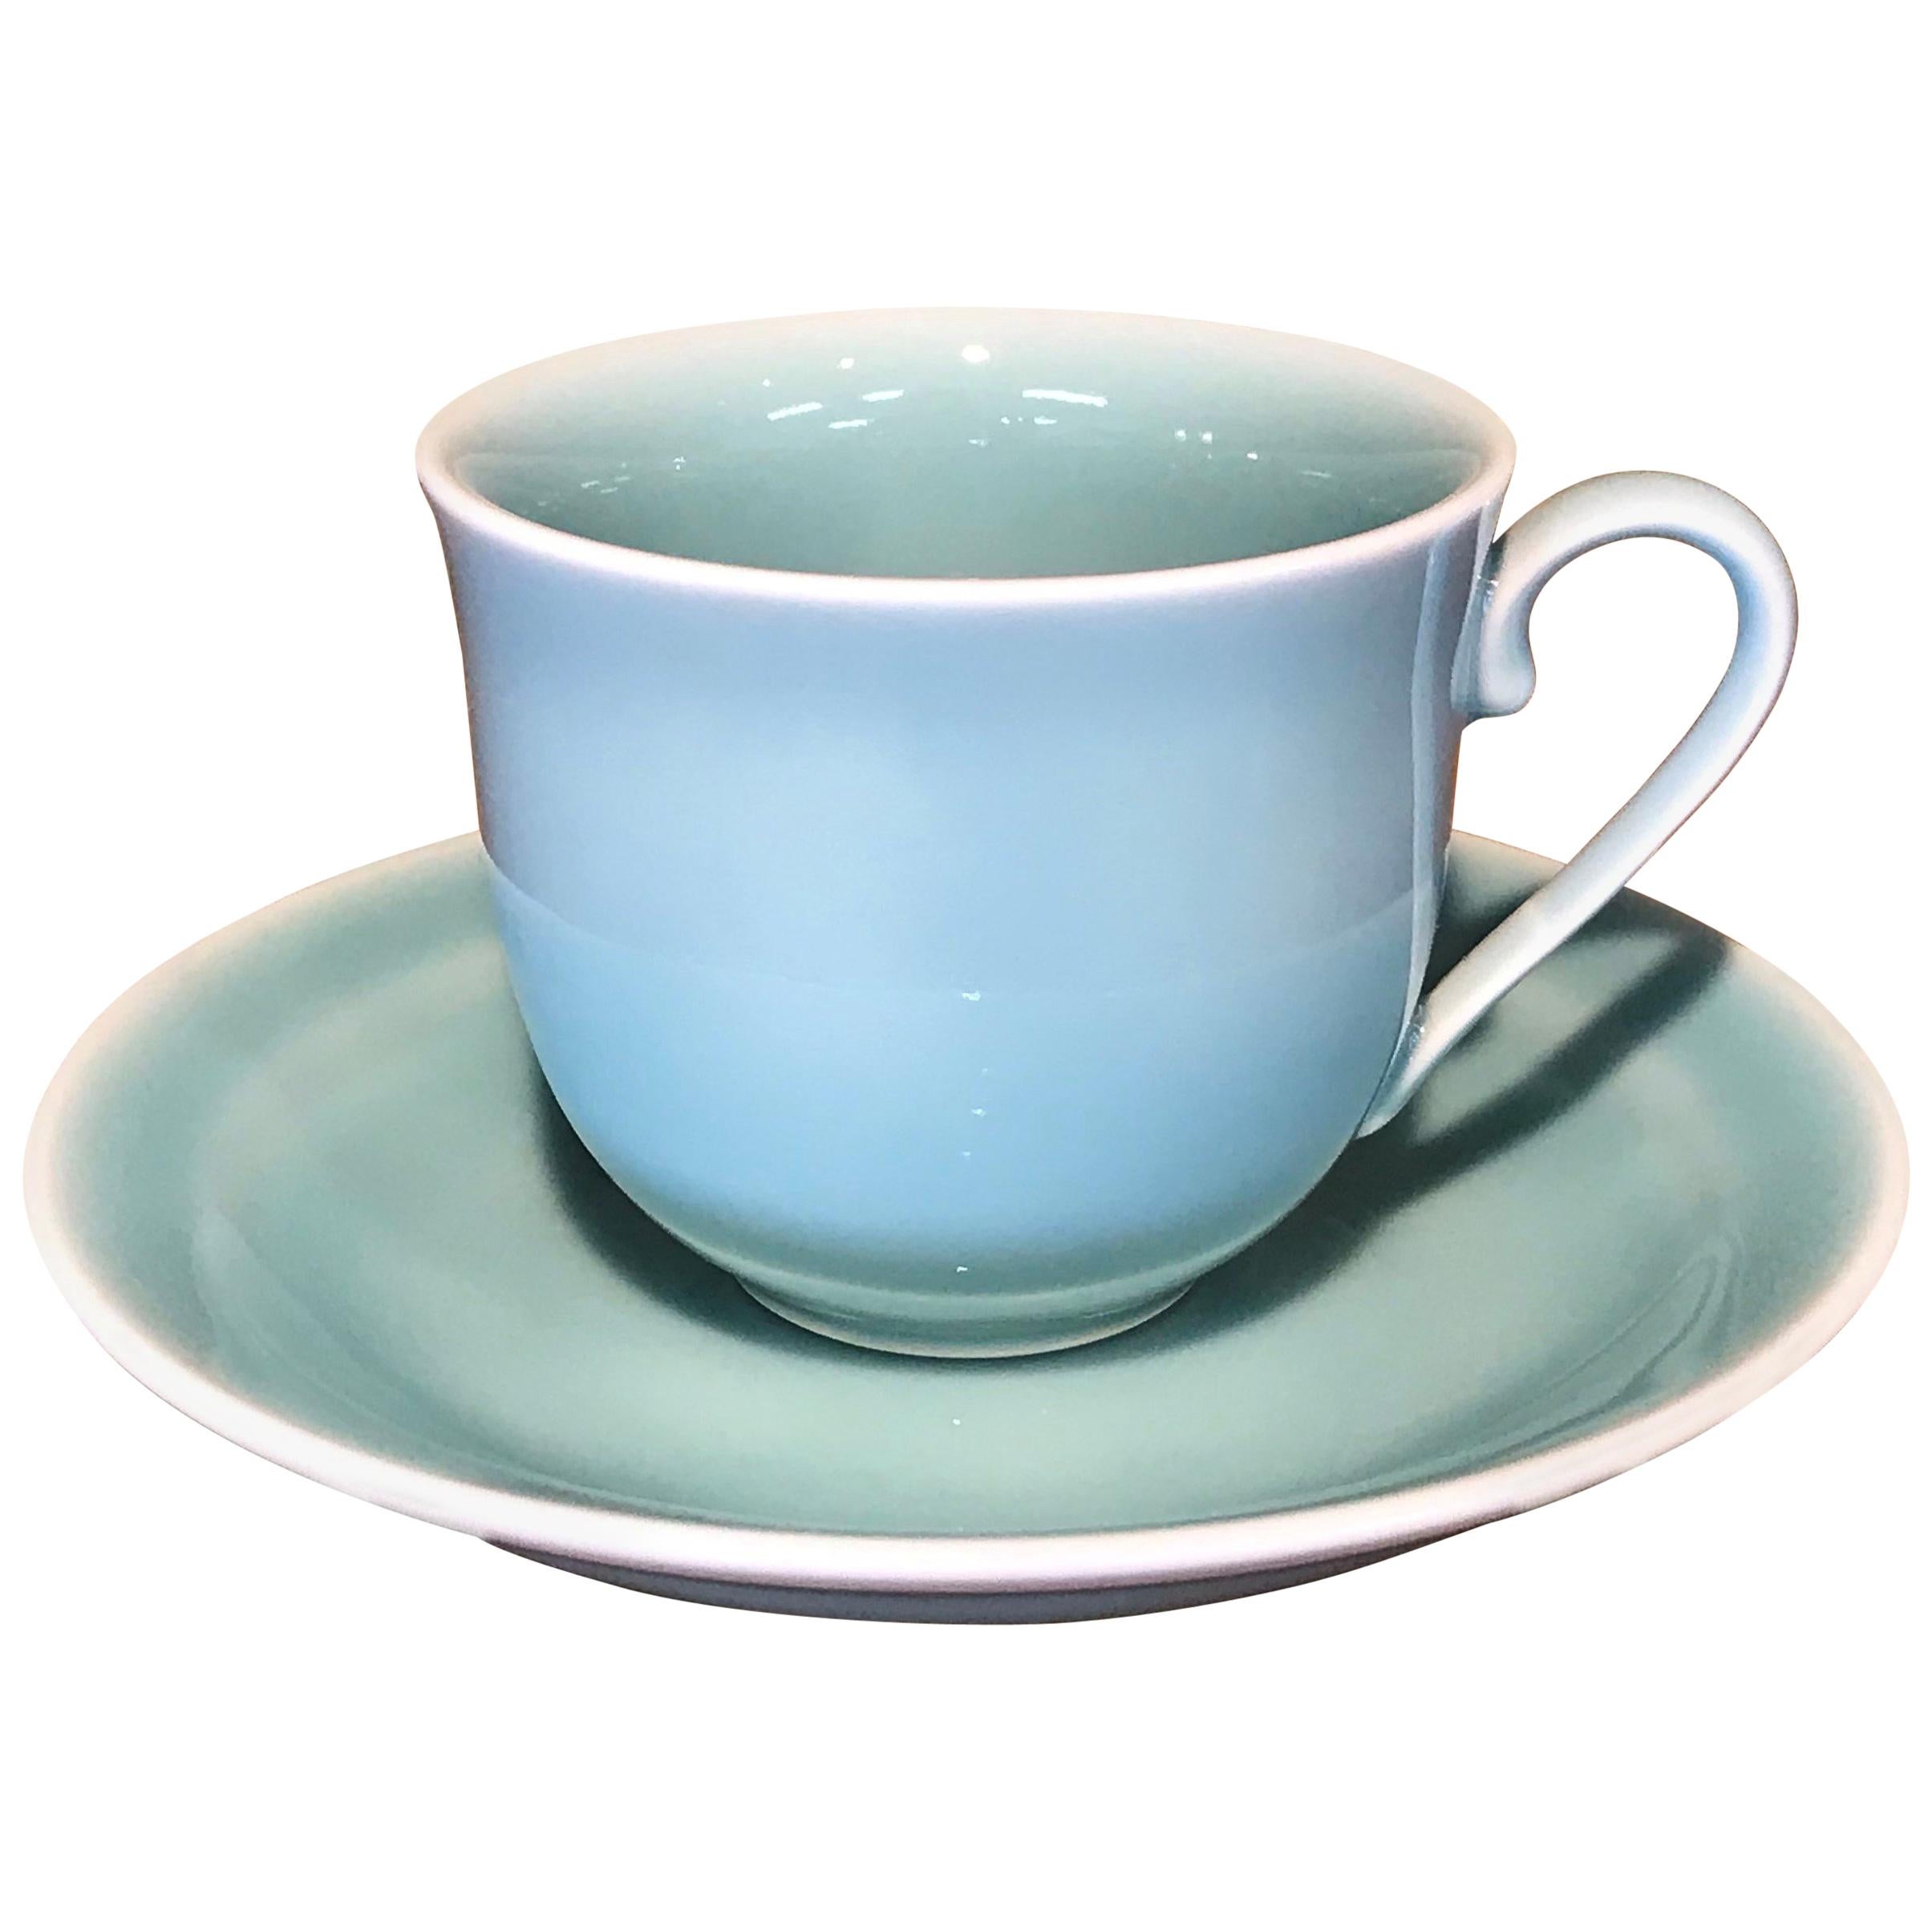 Japanese Hand-Glazed Blue Green Porcelain Cup and Saucer by Master Artist